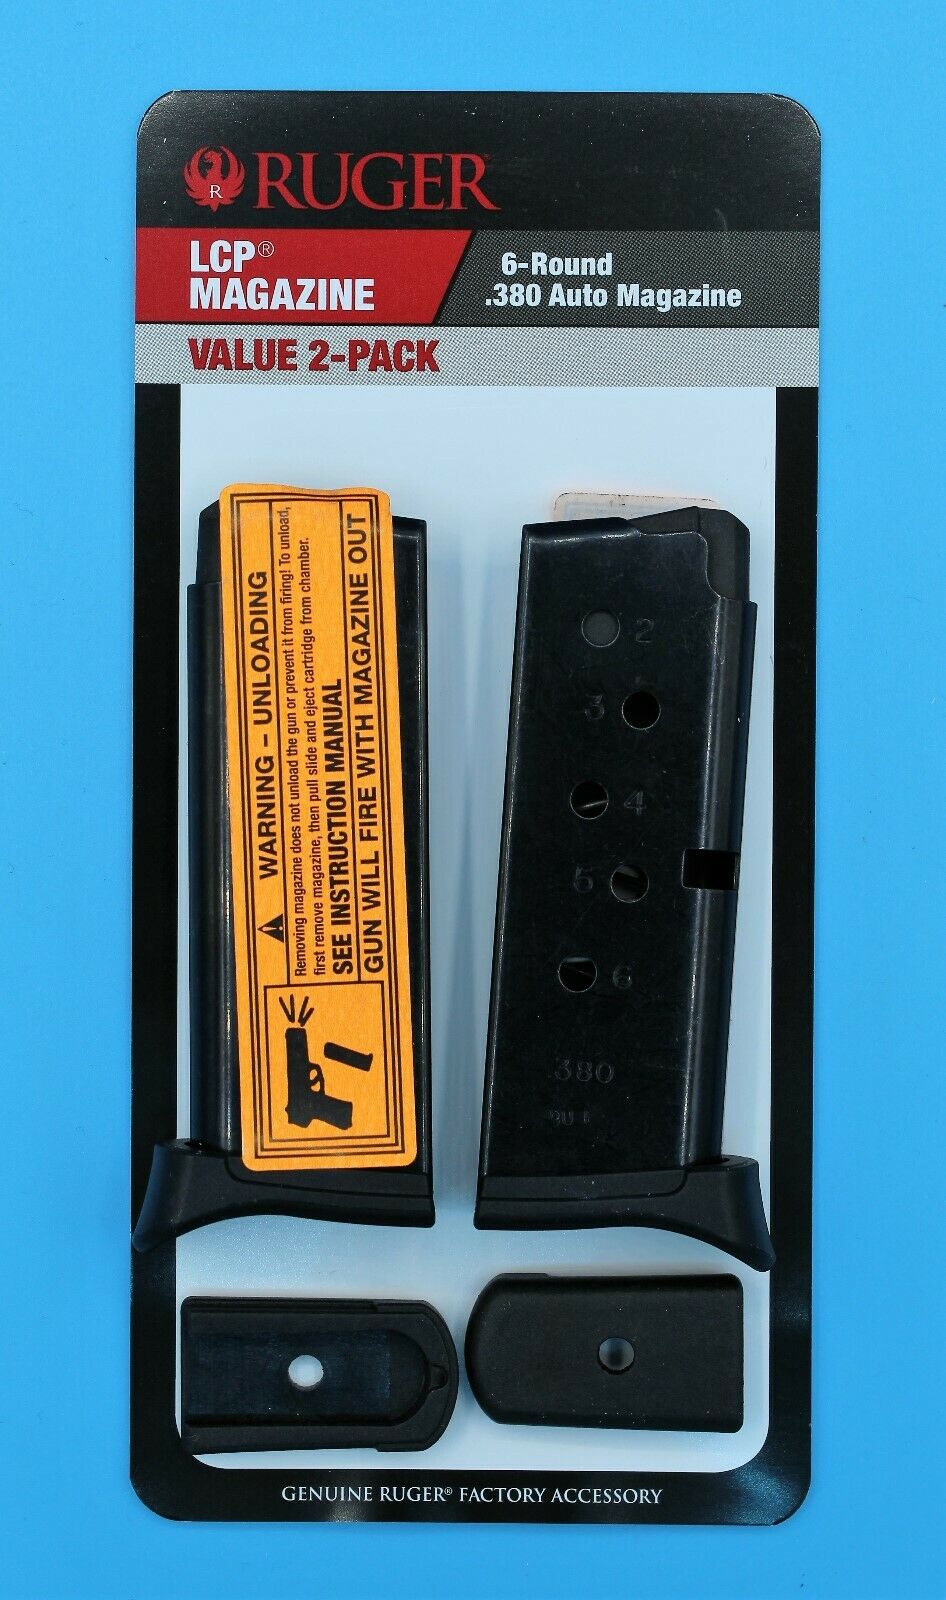 Ruger Lcp Pistol 380 Acp 6 Rd Round Magazine Value 2-pack 90643 Factory Clip Mag